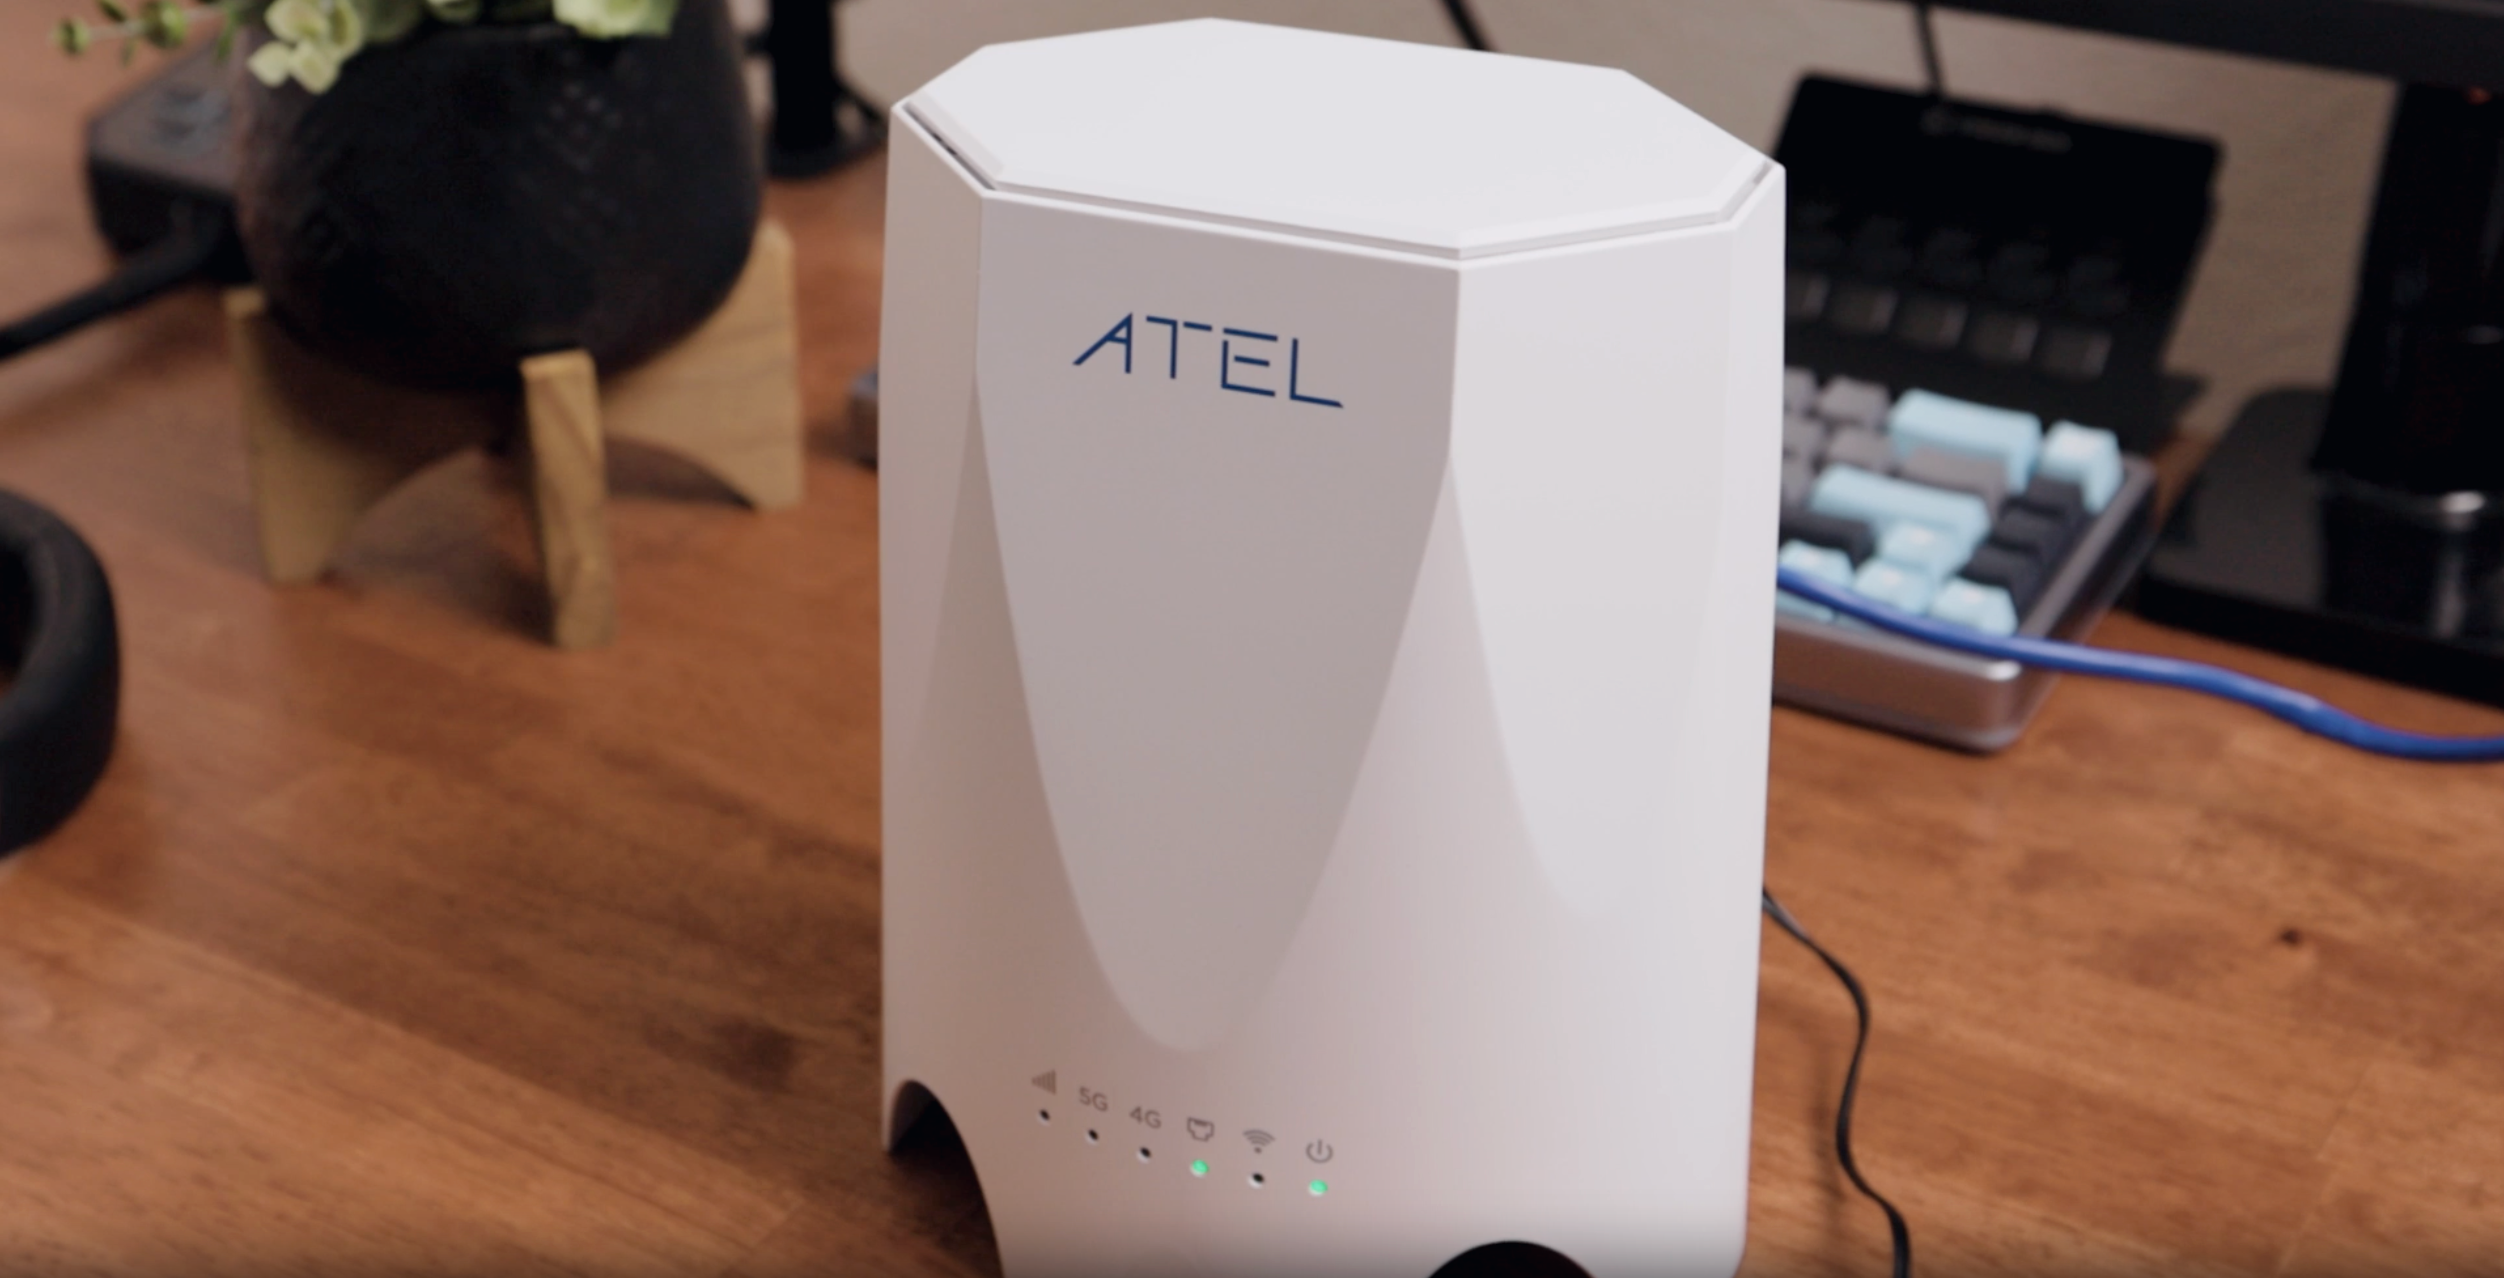 Load video: The ATEL WB550 unboxing video and in use.